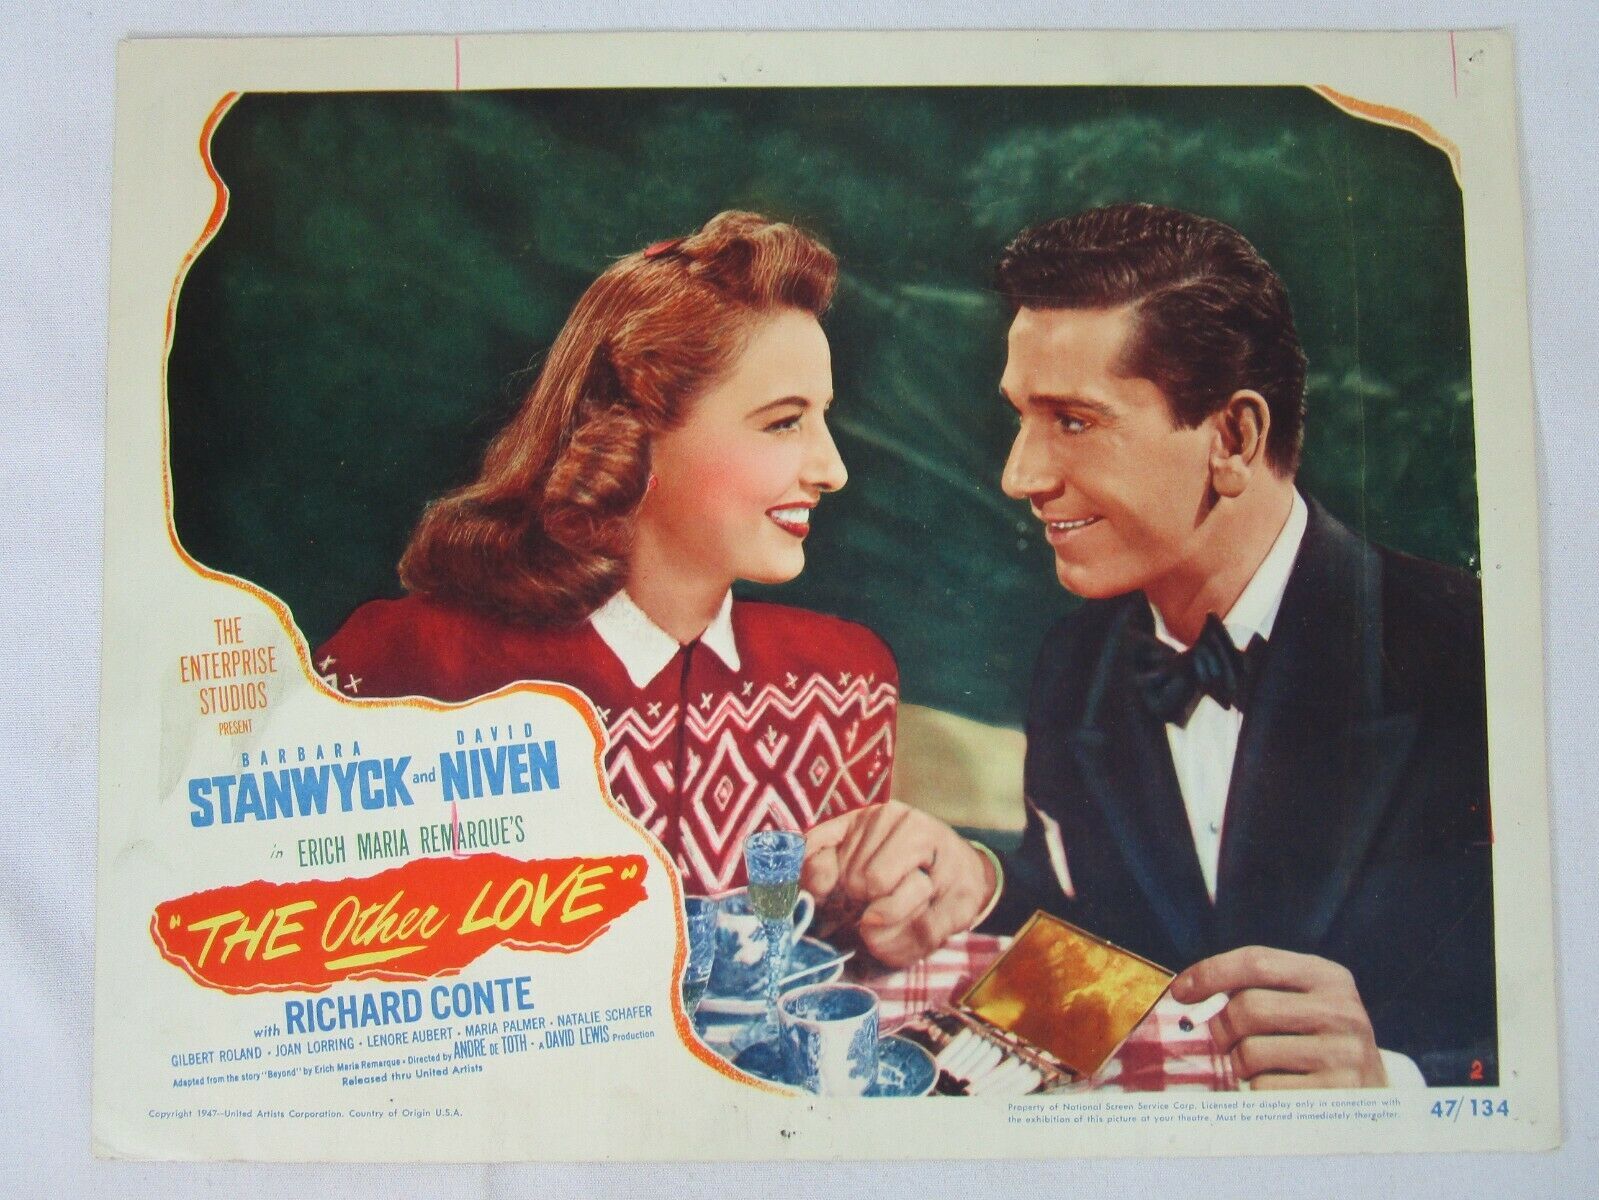 Primary image for The Other Love 1947 Original 11x14 Lobby Card Barbara Stanwyck David Niven #2